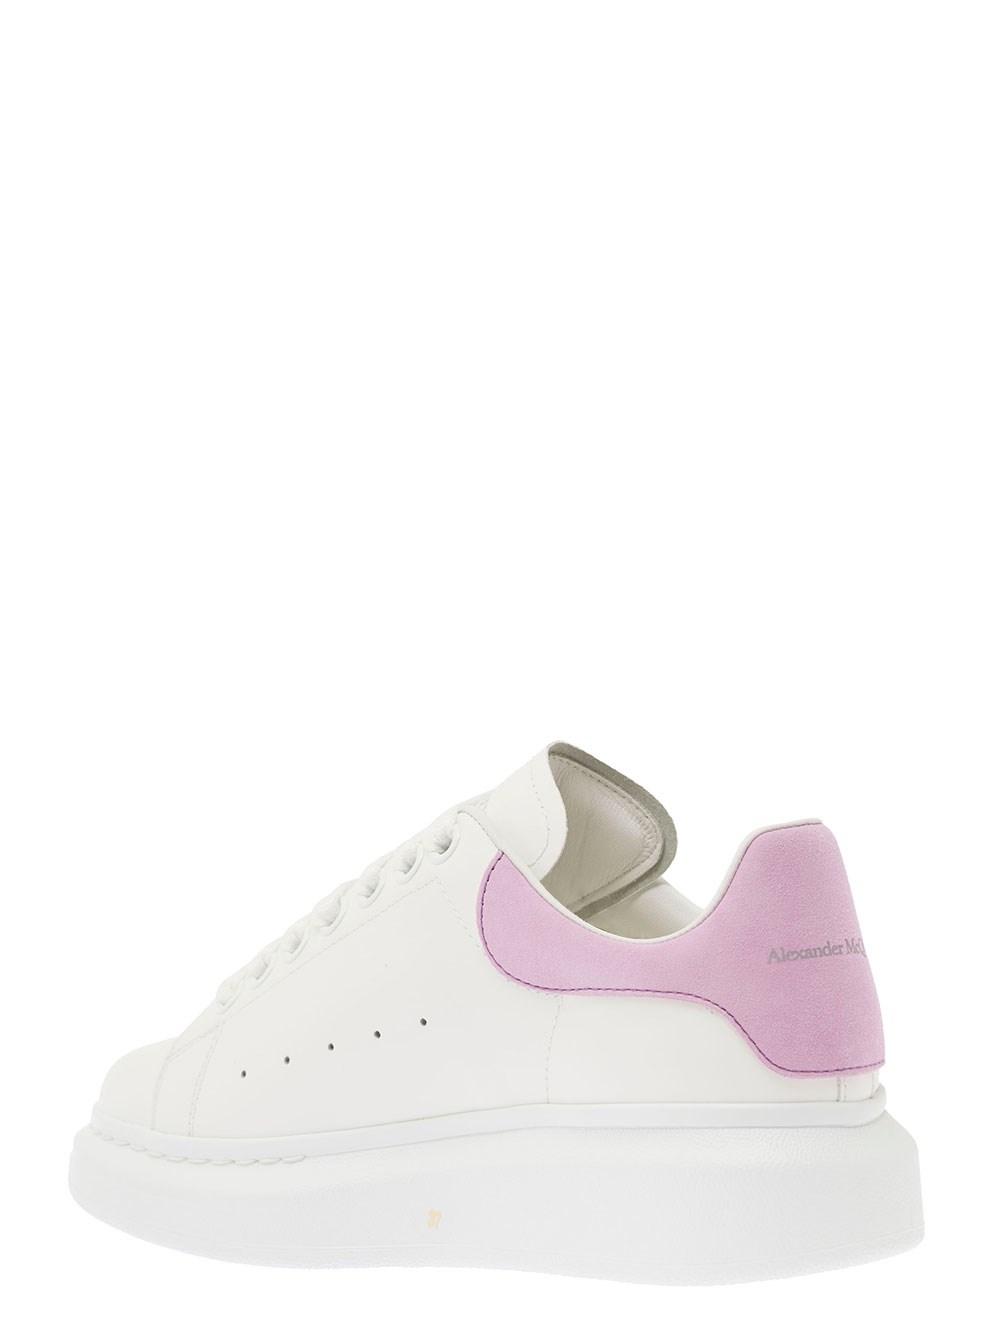 pocket rear obvious Alexander McQueen Oversize White And Pink Leather Sneakers Woman | Lyst